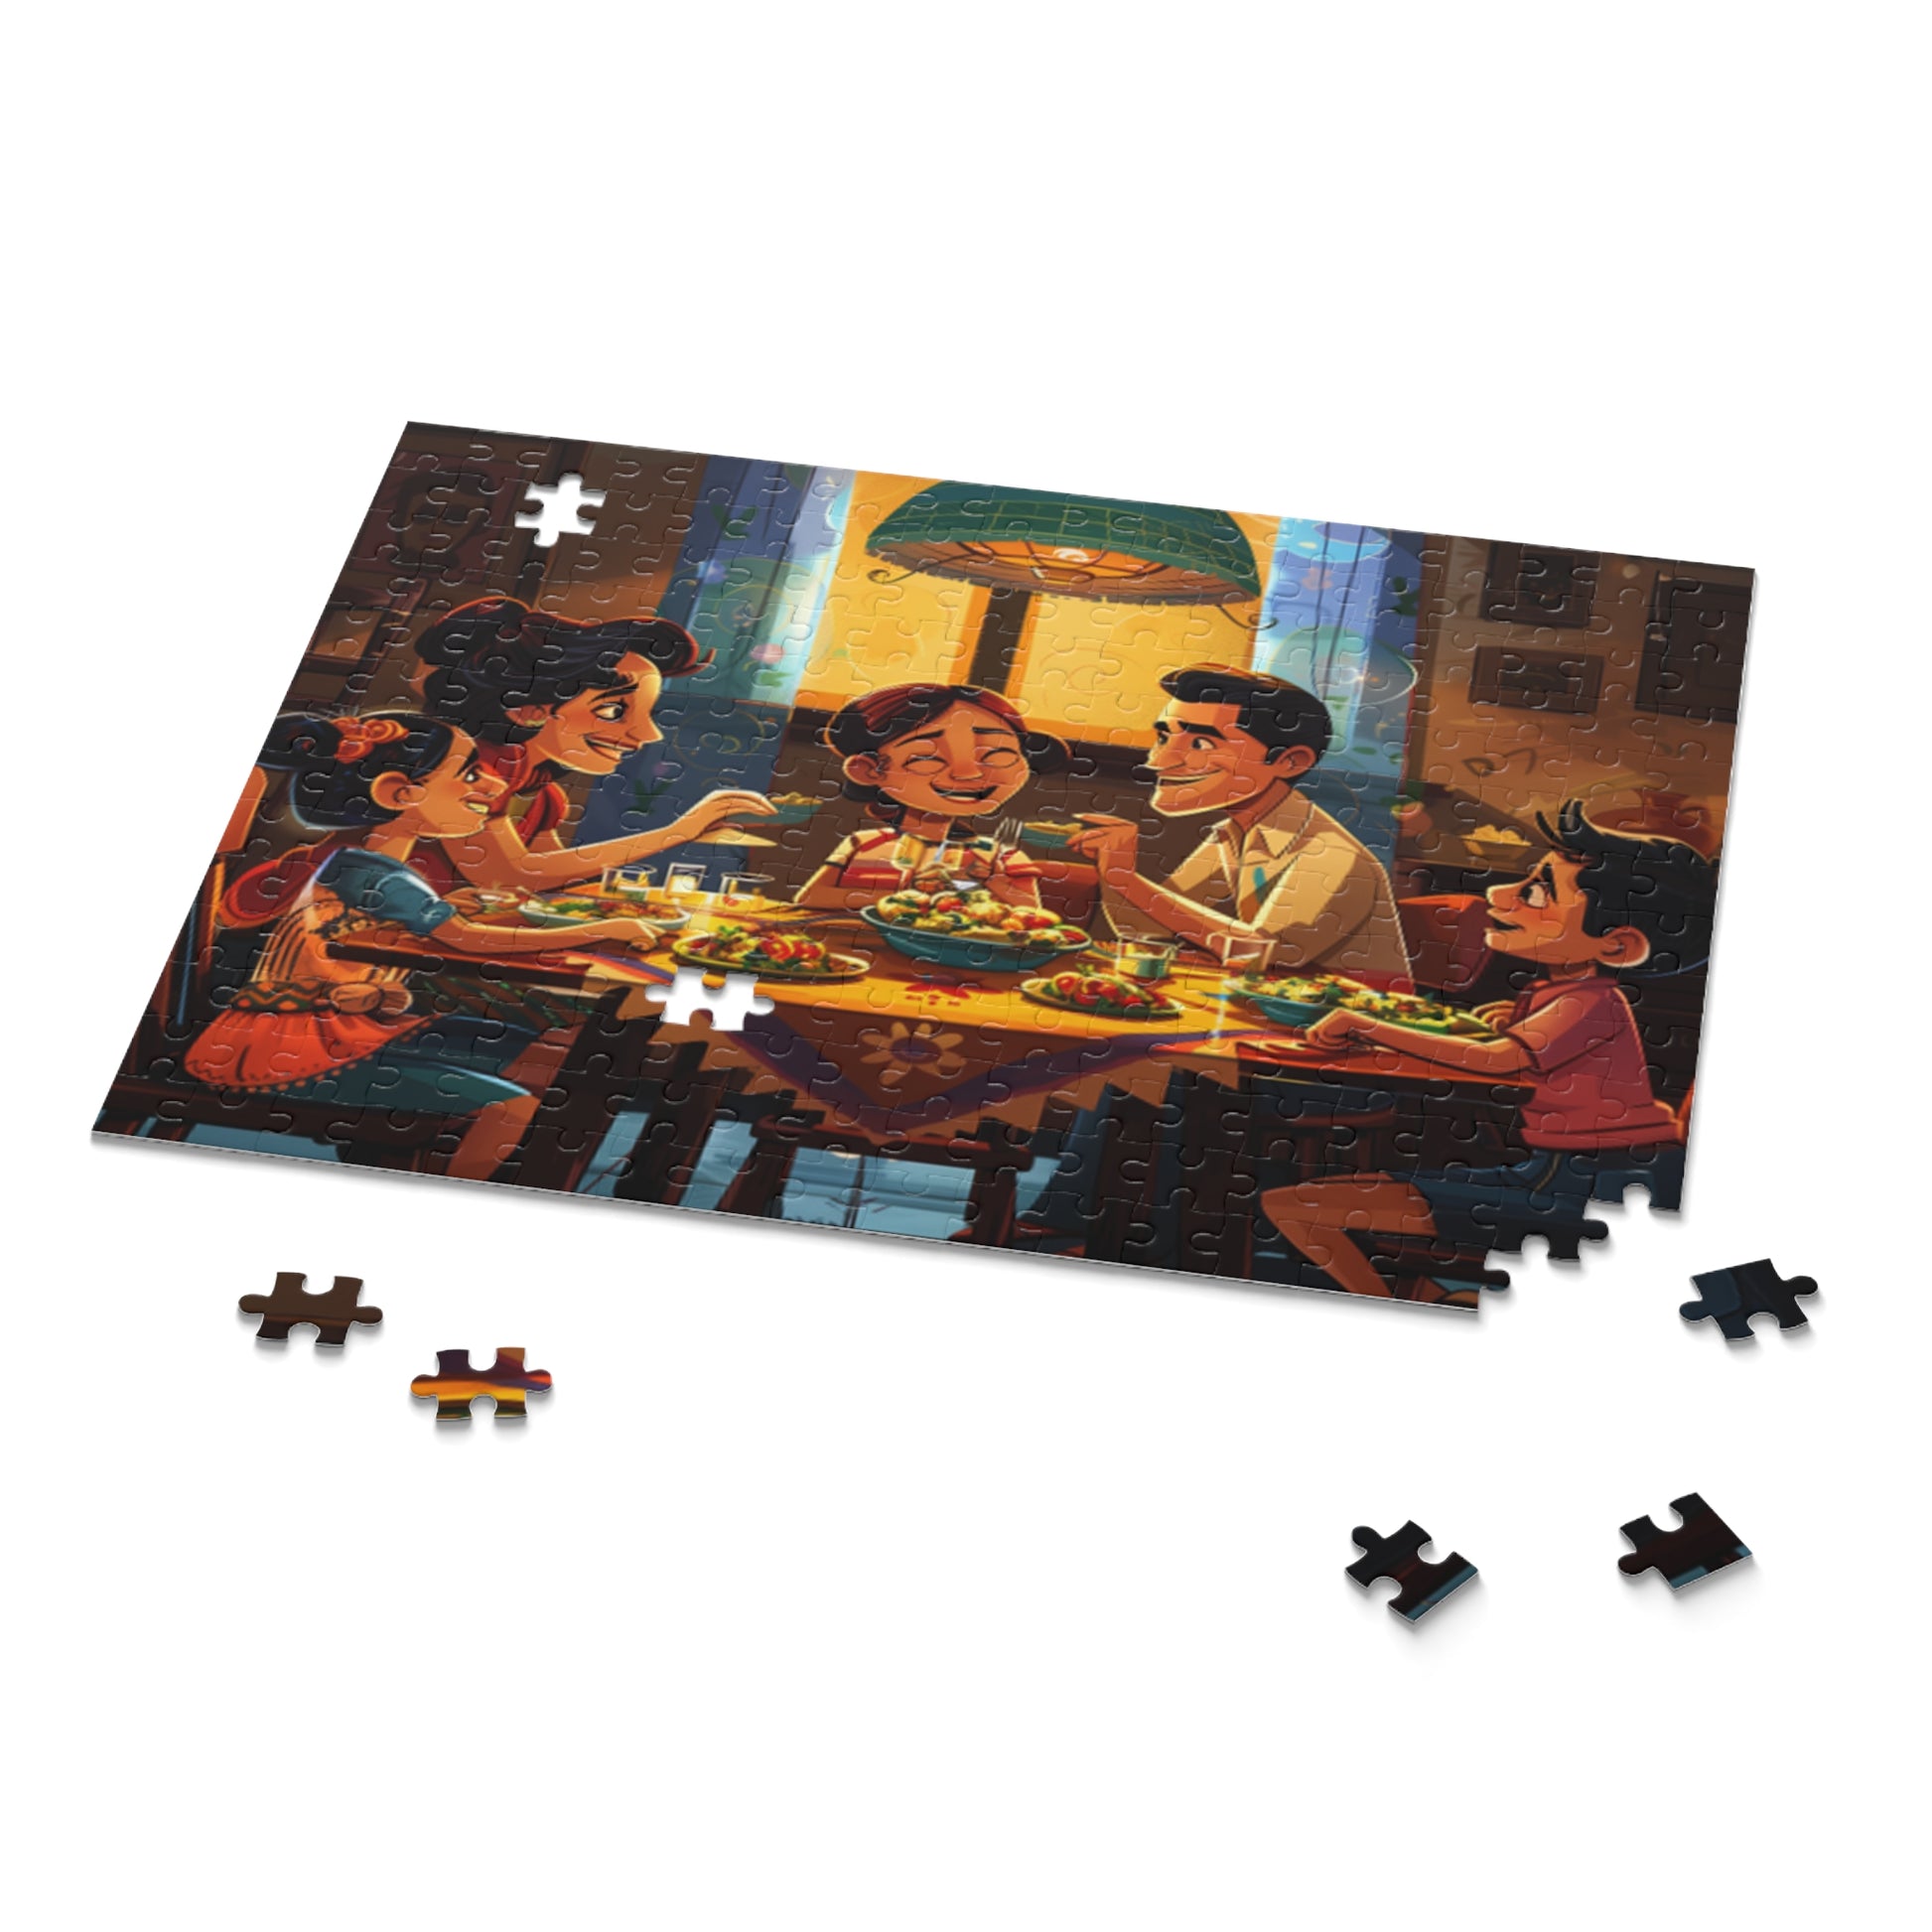 Mexican Art Happy Family Retro Jigsaw Puzzle Adult Birthday Business Jigsaw Puzzle Gift for Him Funny Humorous Indoor Outdoor Game Gift For Her Online-9